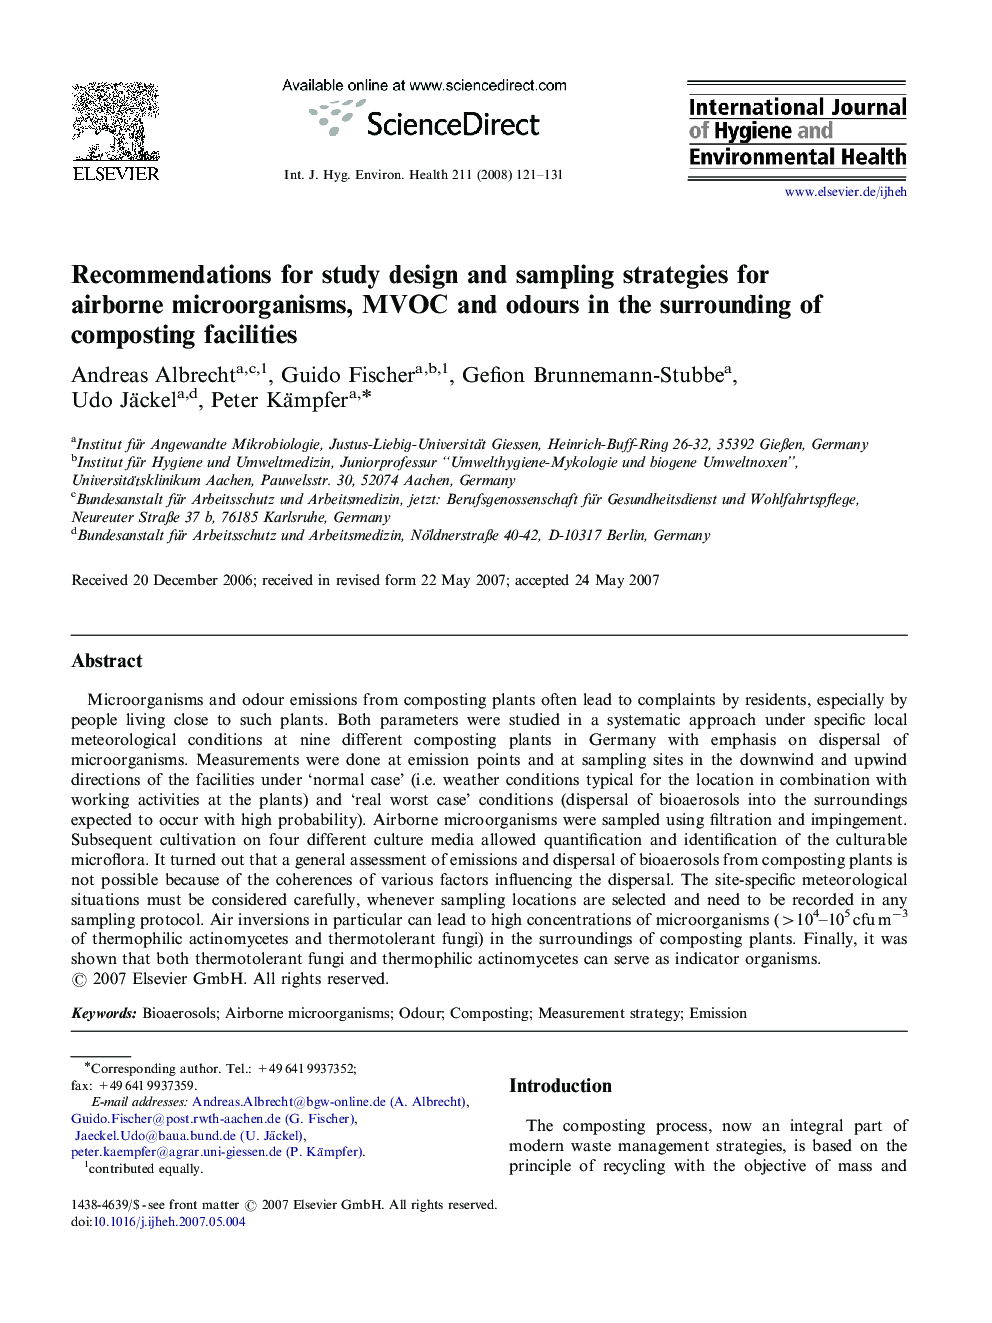 Recommendations for study design and sampling strategies for airborne microorganisms, MVOC and odours in the surrounding of composting facilities